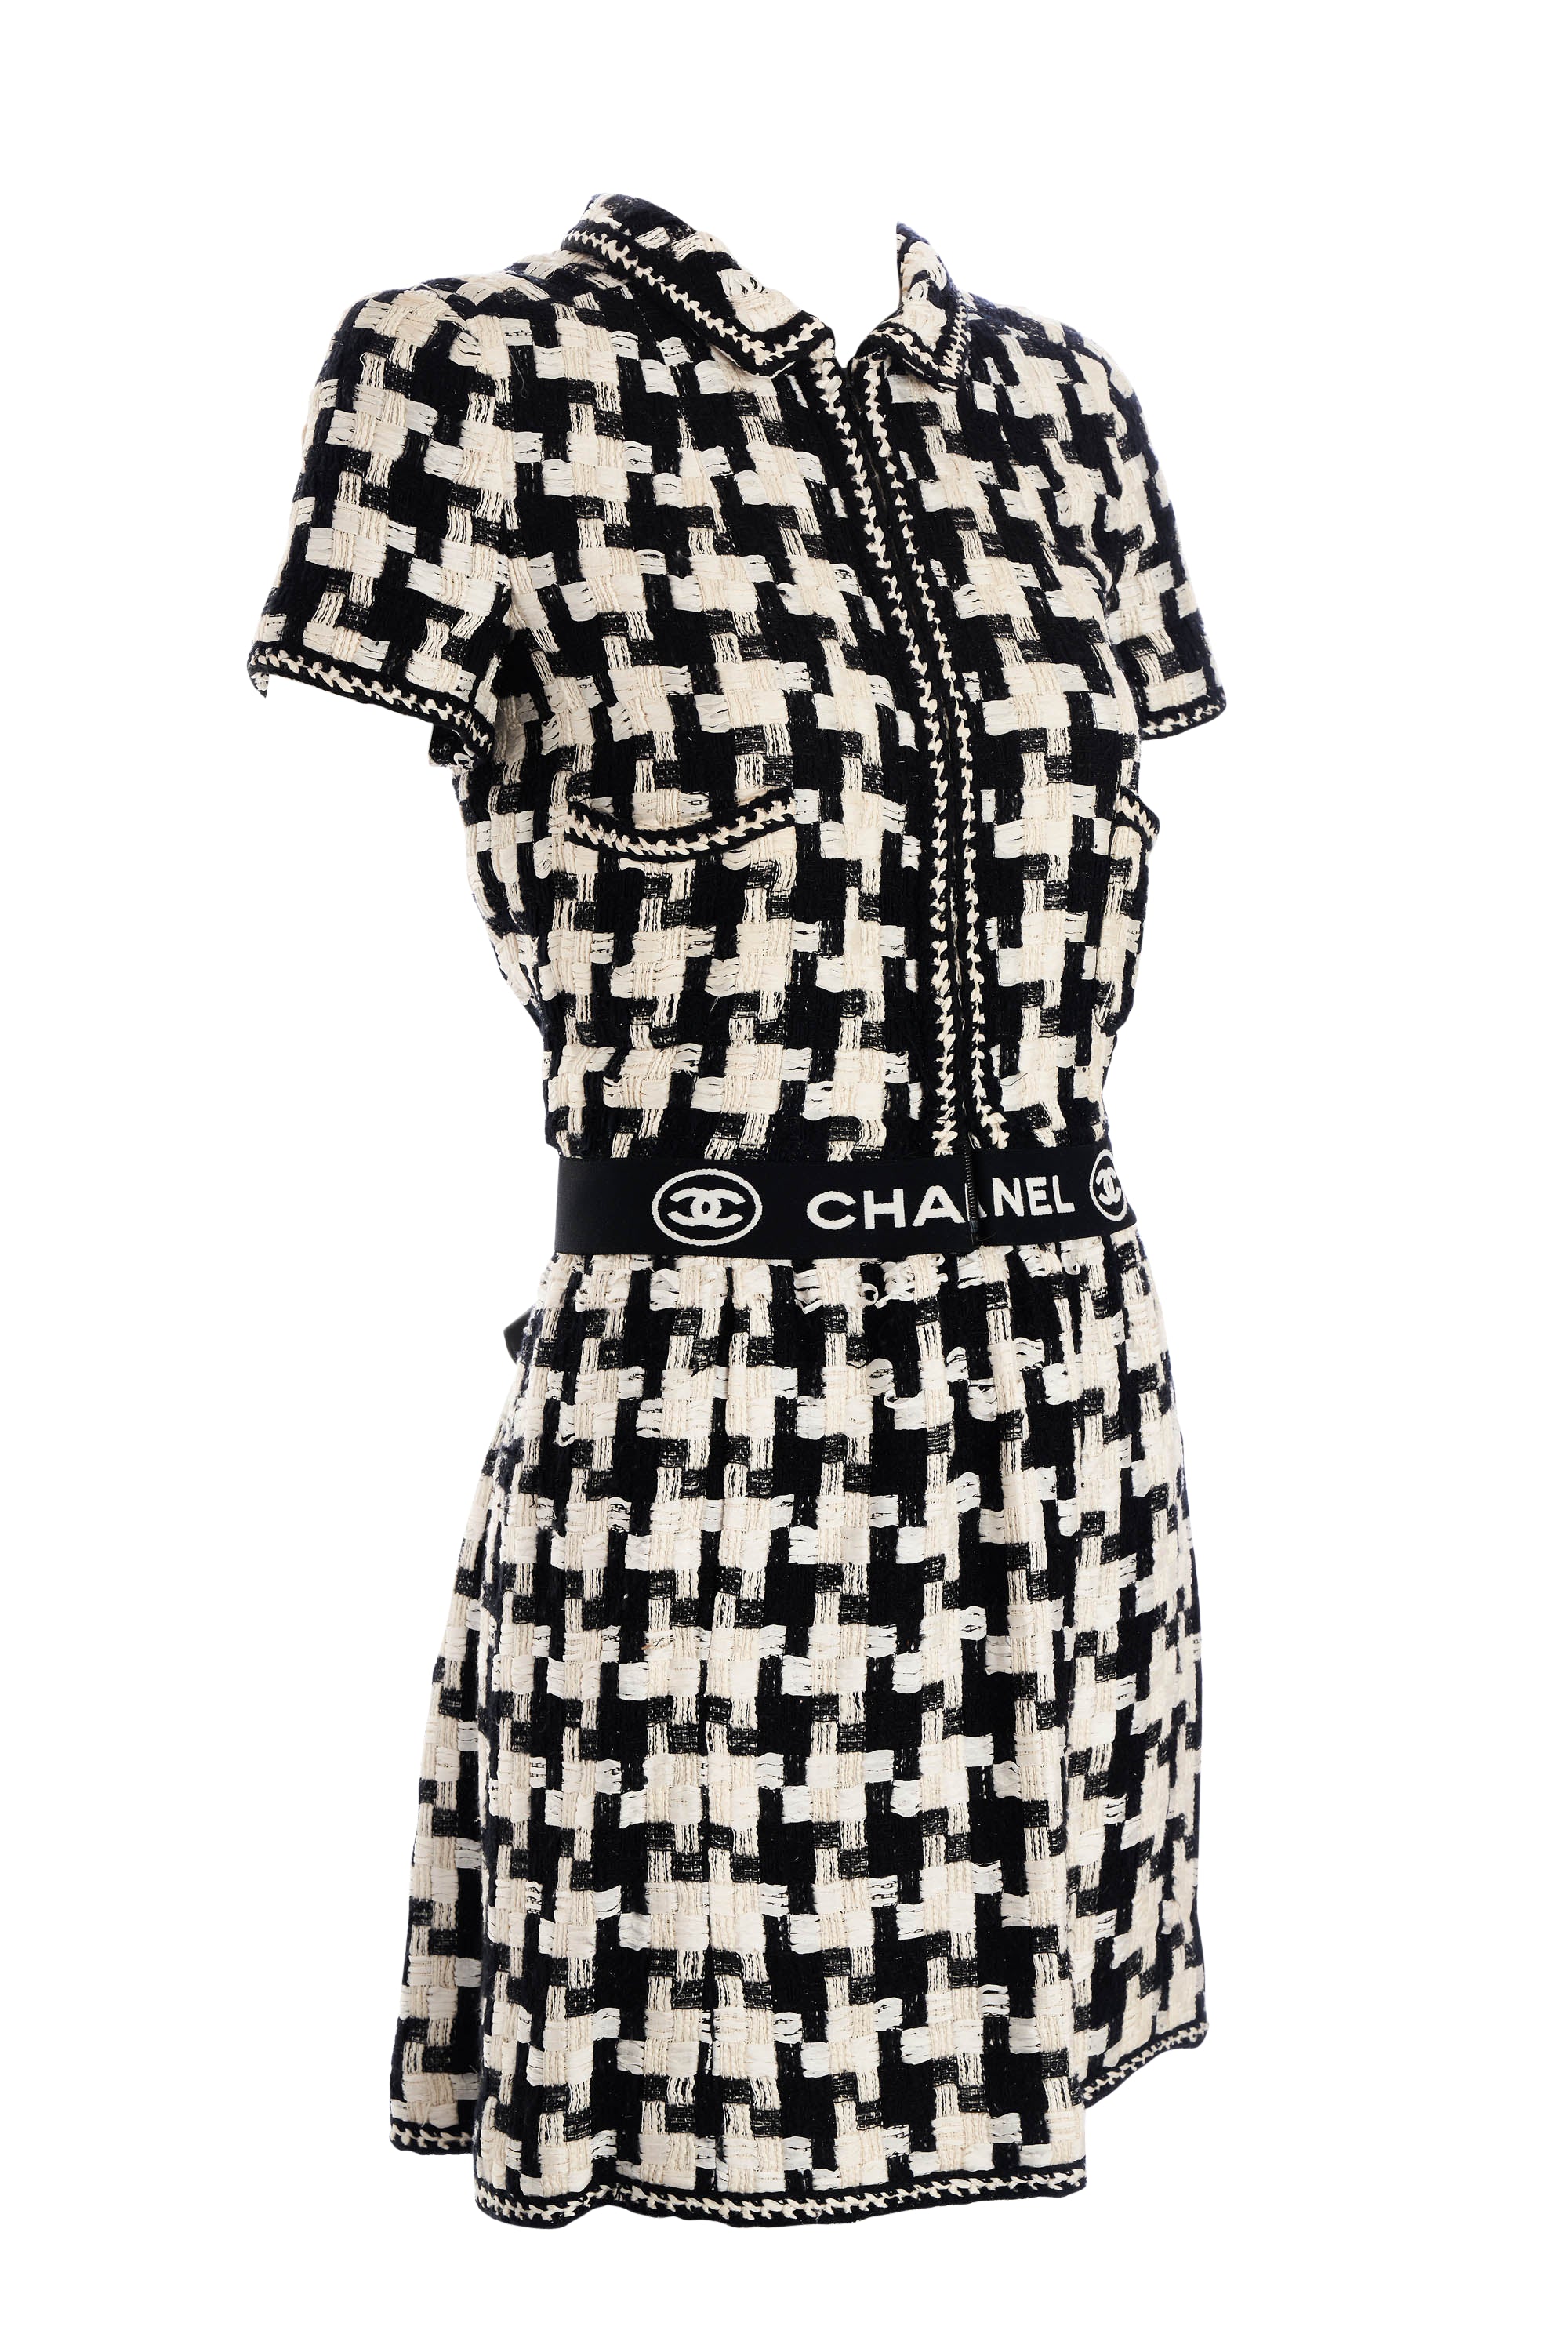 Chanel Black and White Large Houndstooth Jacket